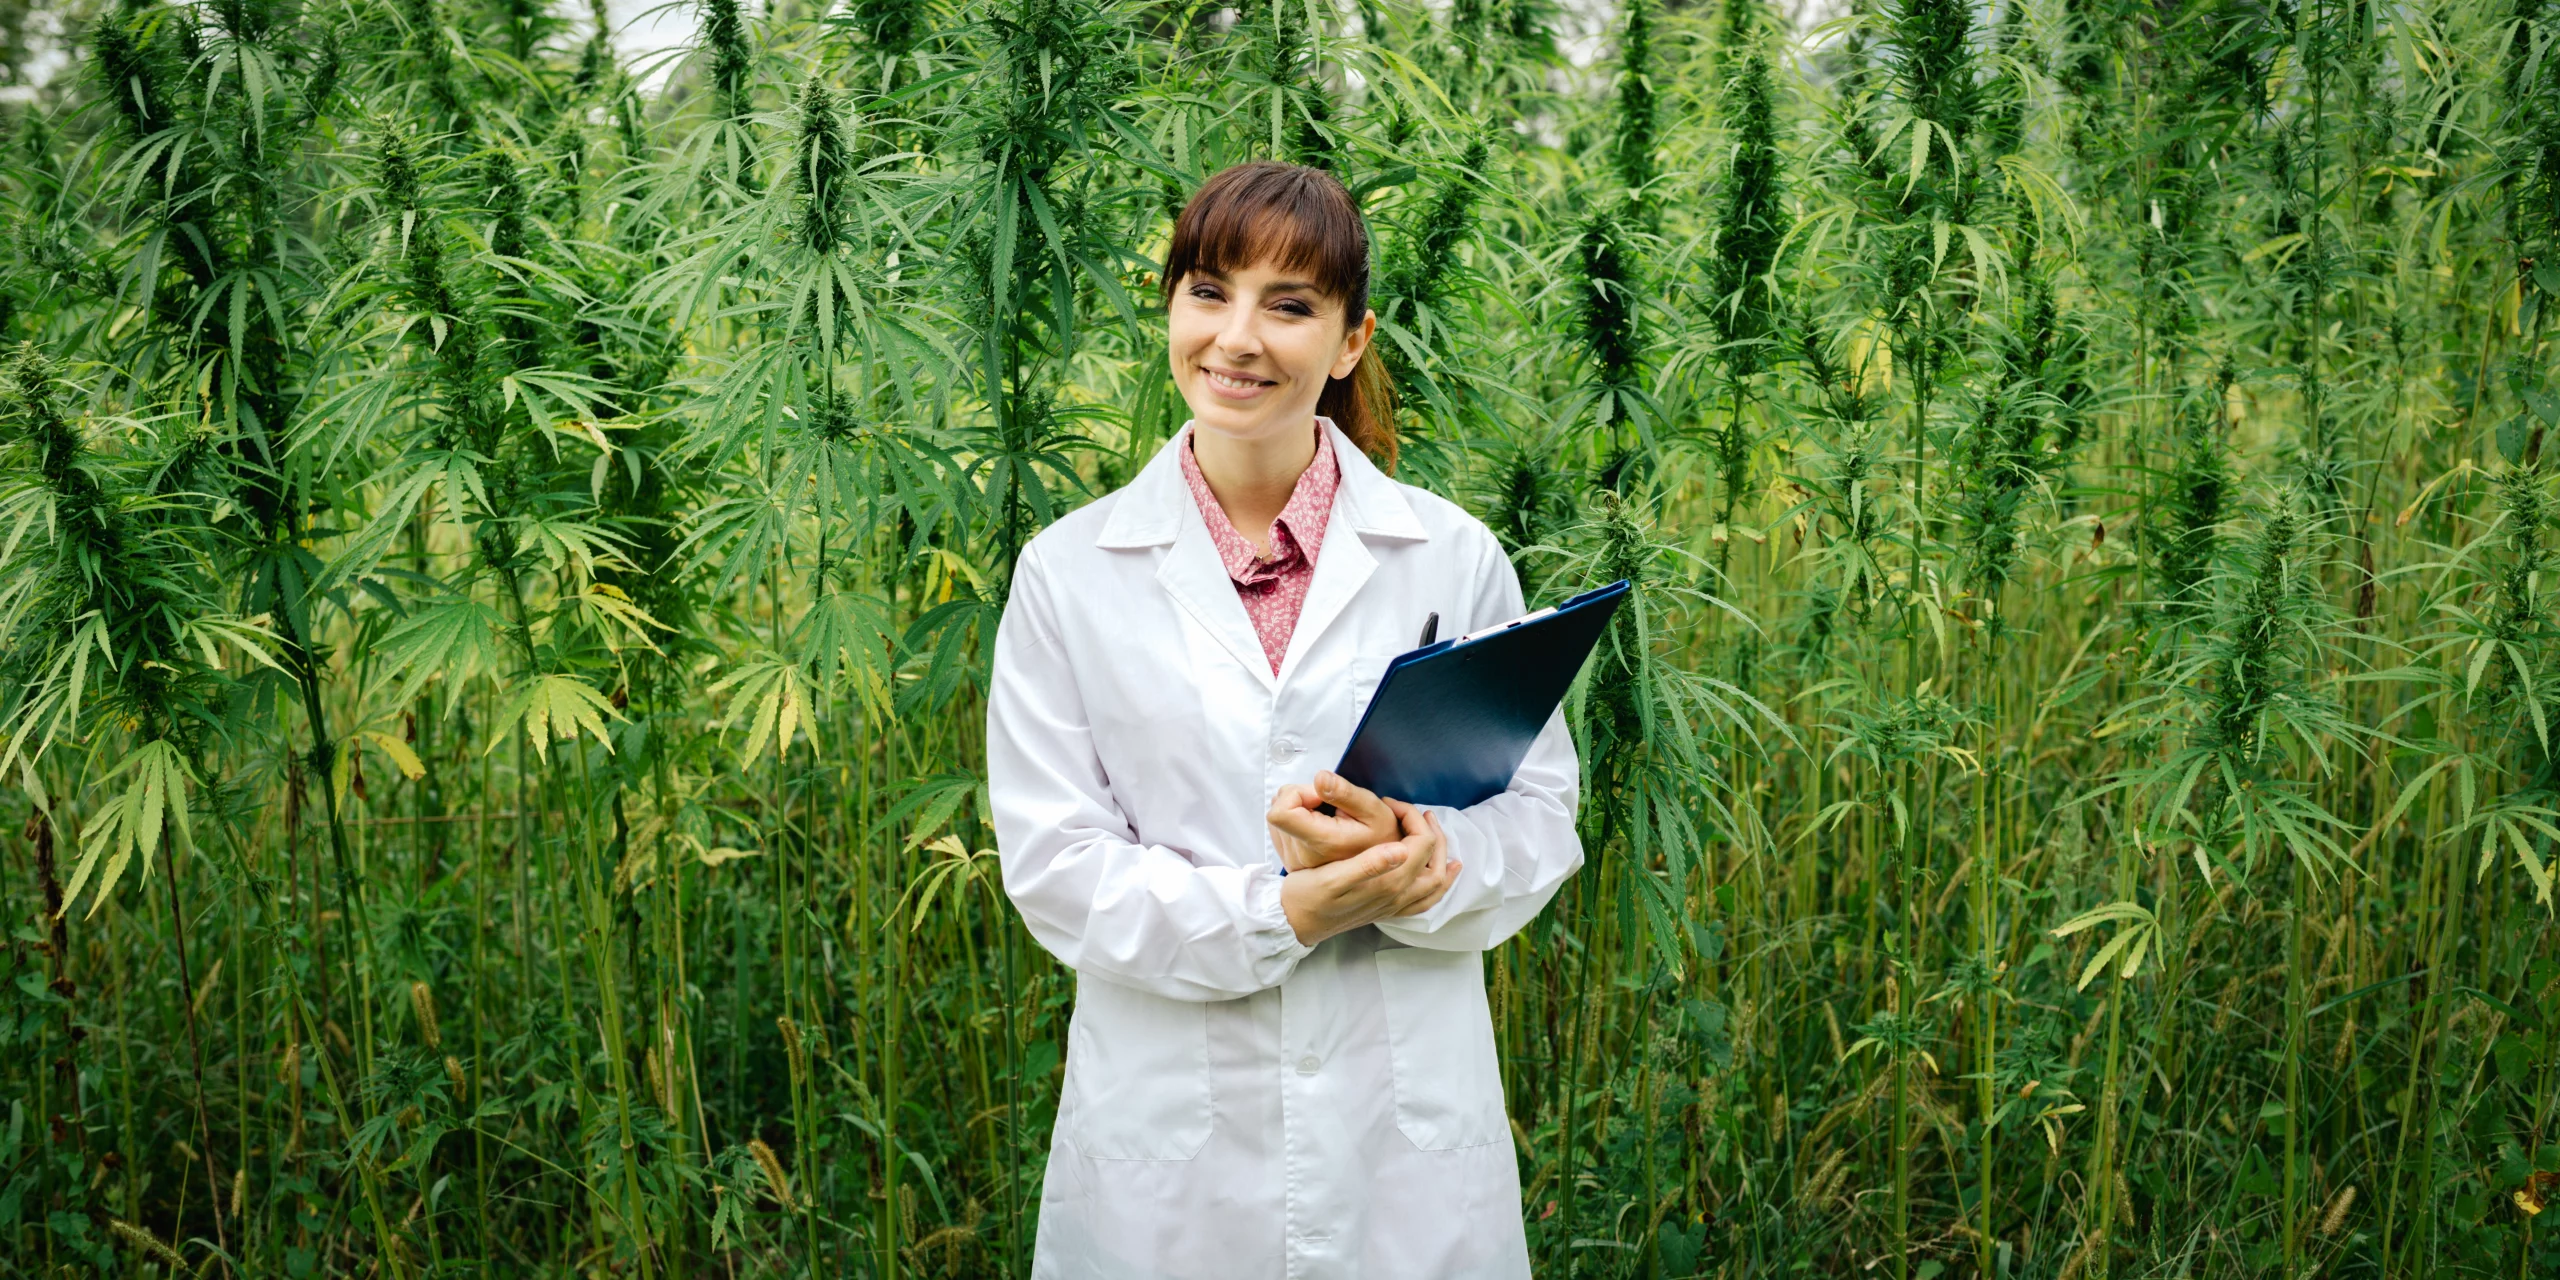 California awards $20M in cannabis research grants